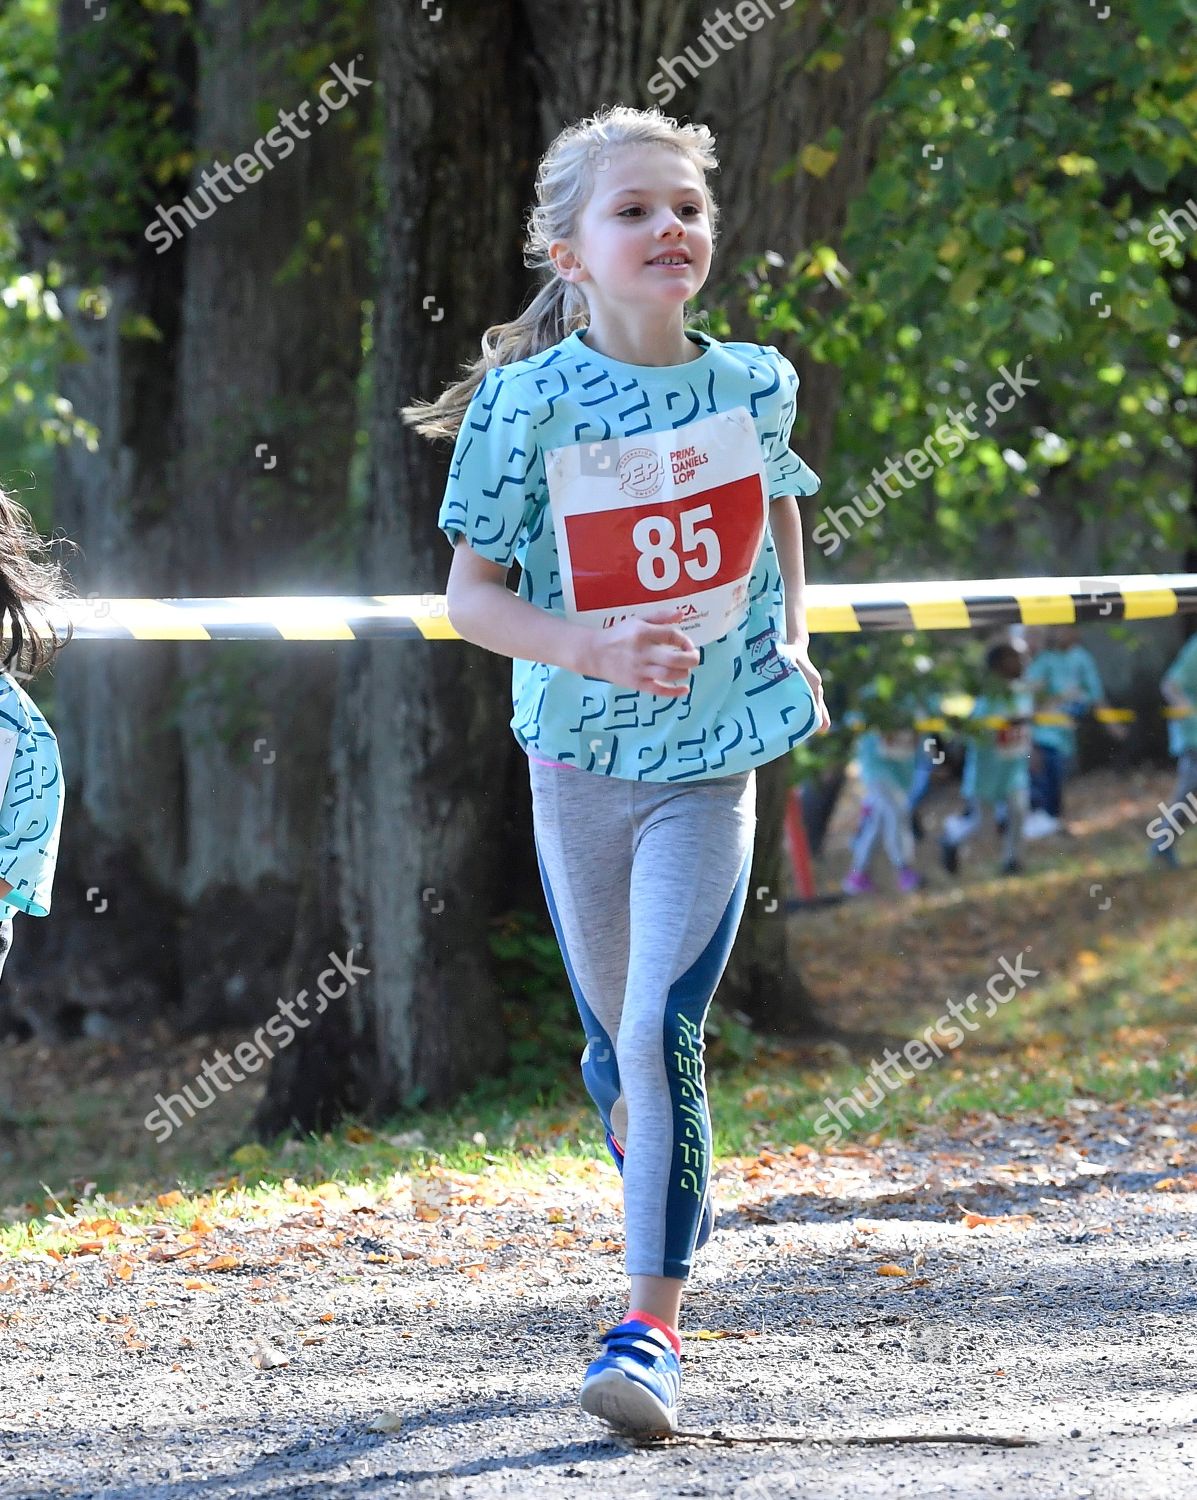 race-and-pep-day-stockholm-sweden-shutterstock-editorial-9884111ab.jpg